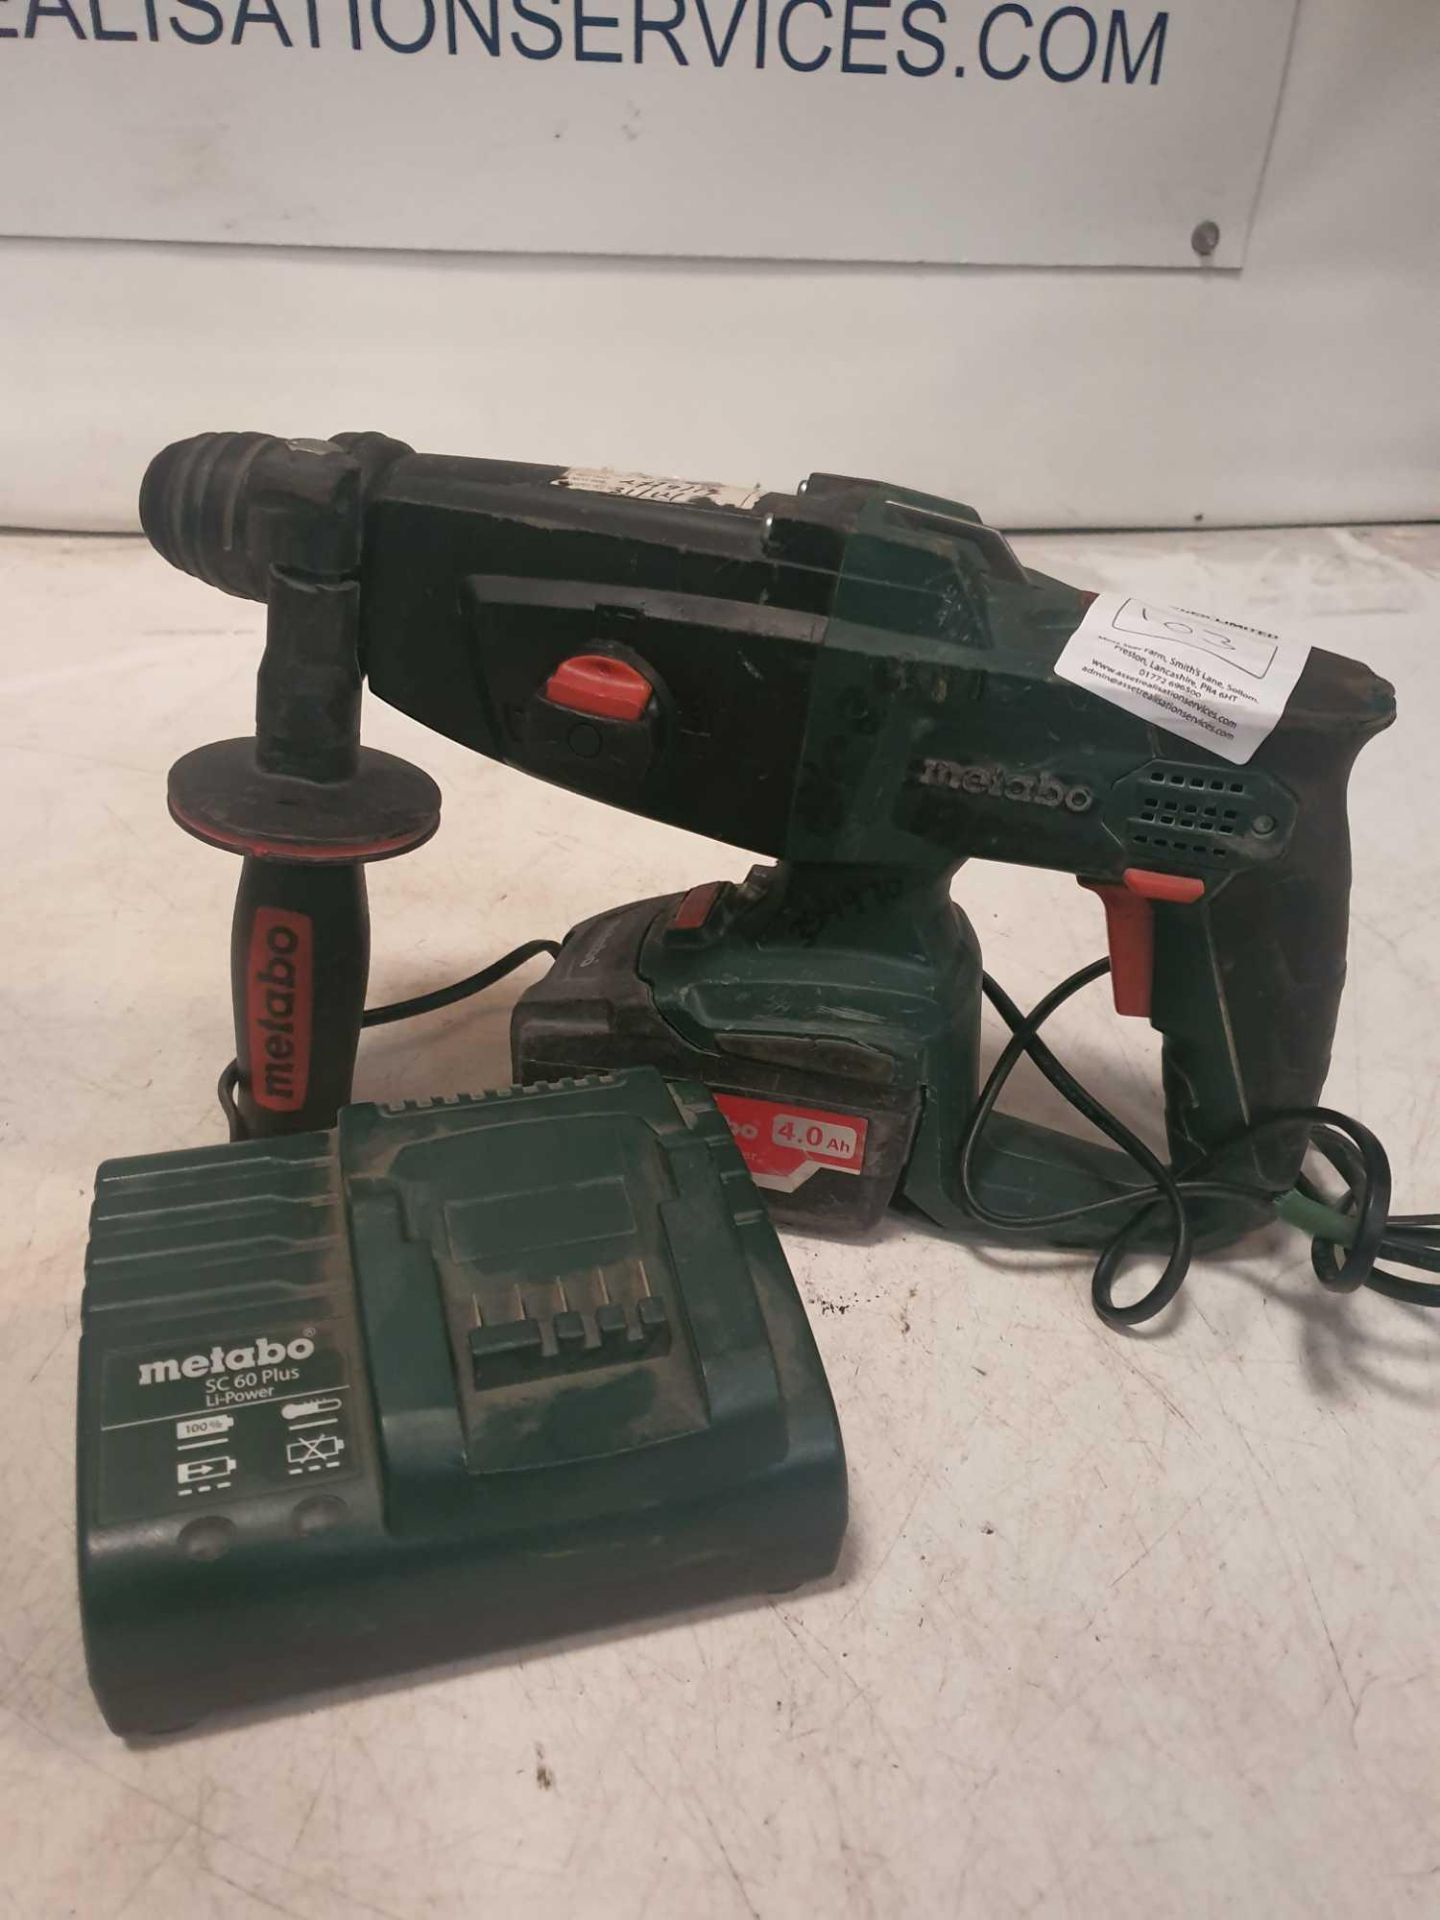 Metabo 18v rotary hammer drill with charger